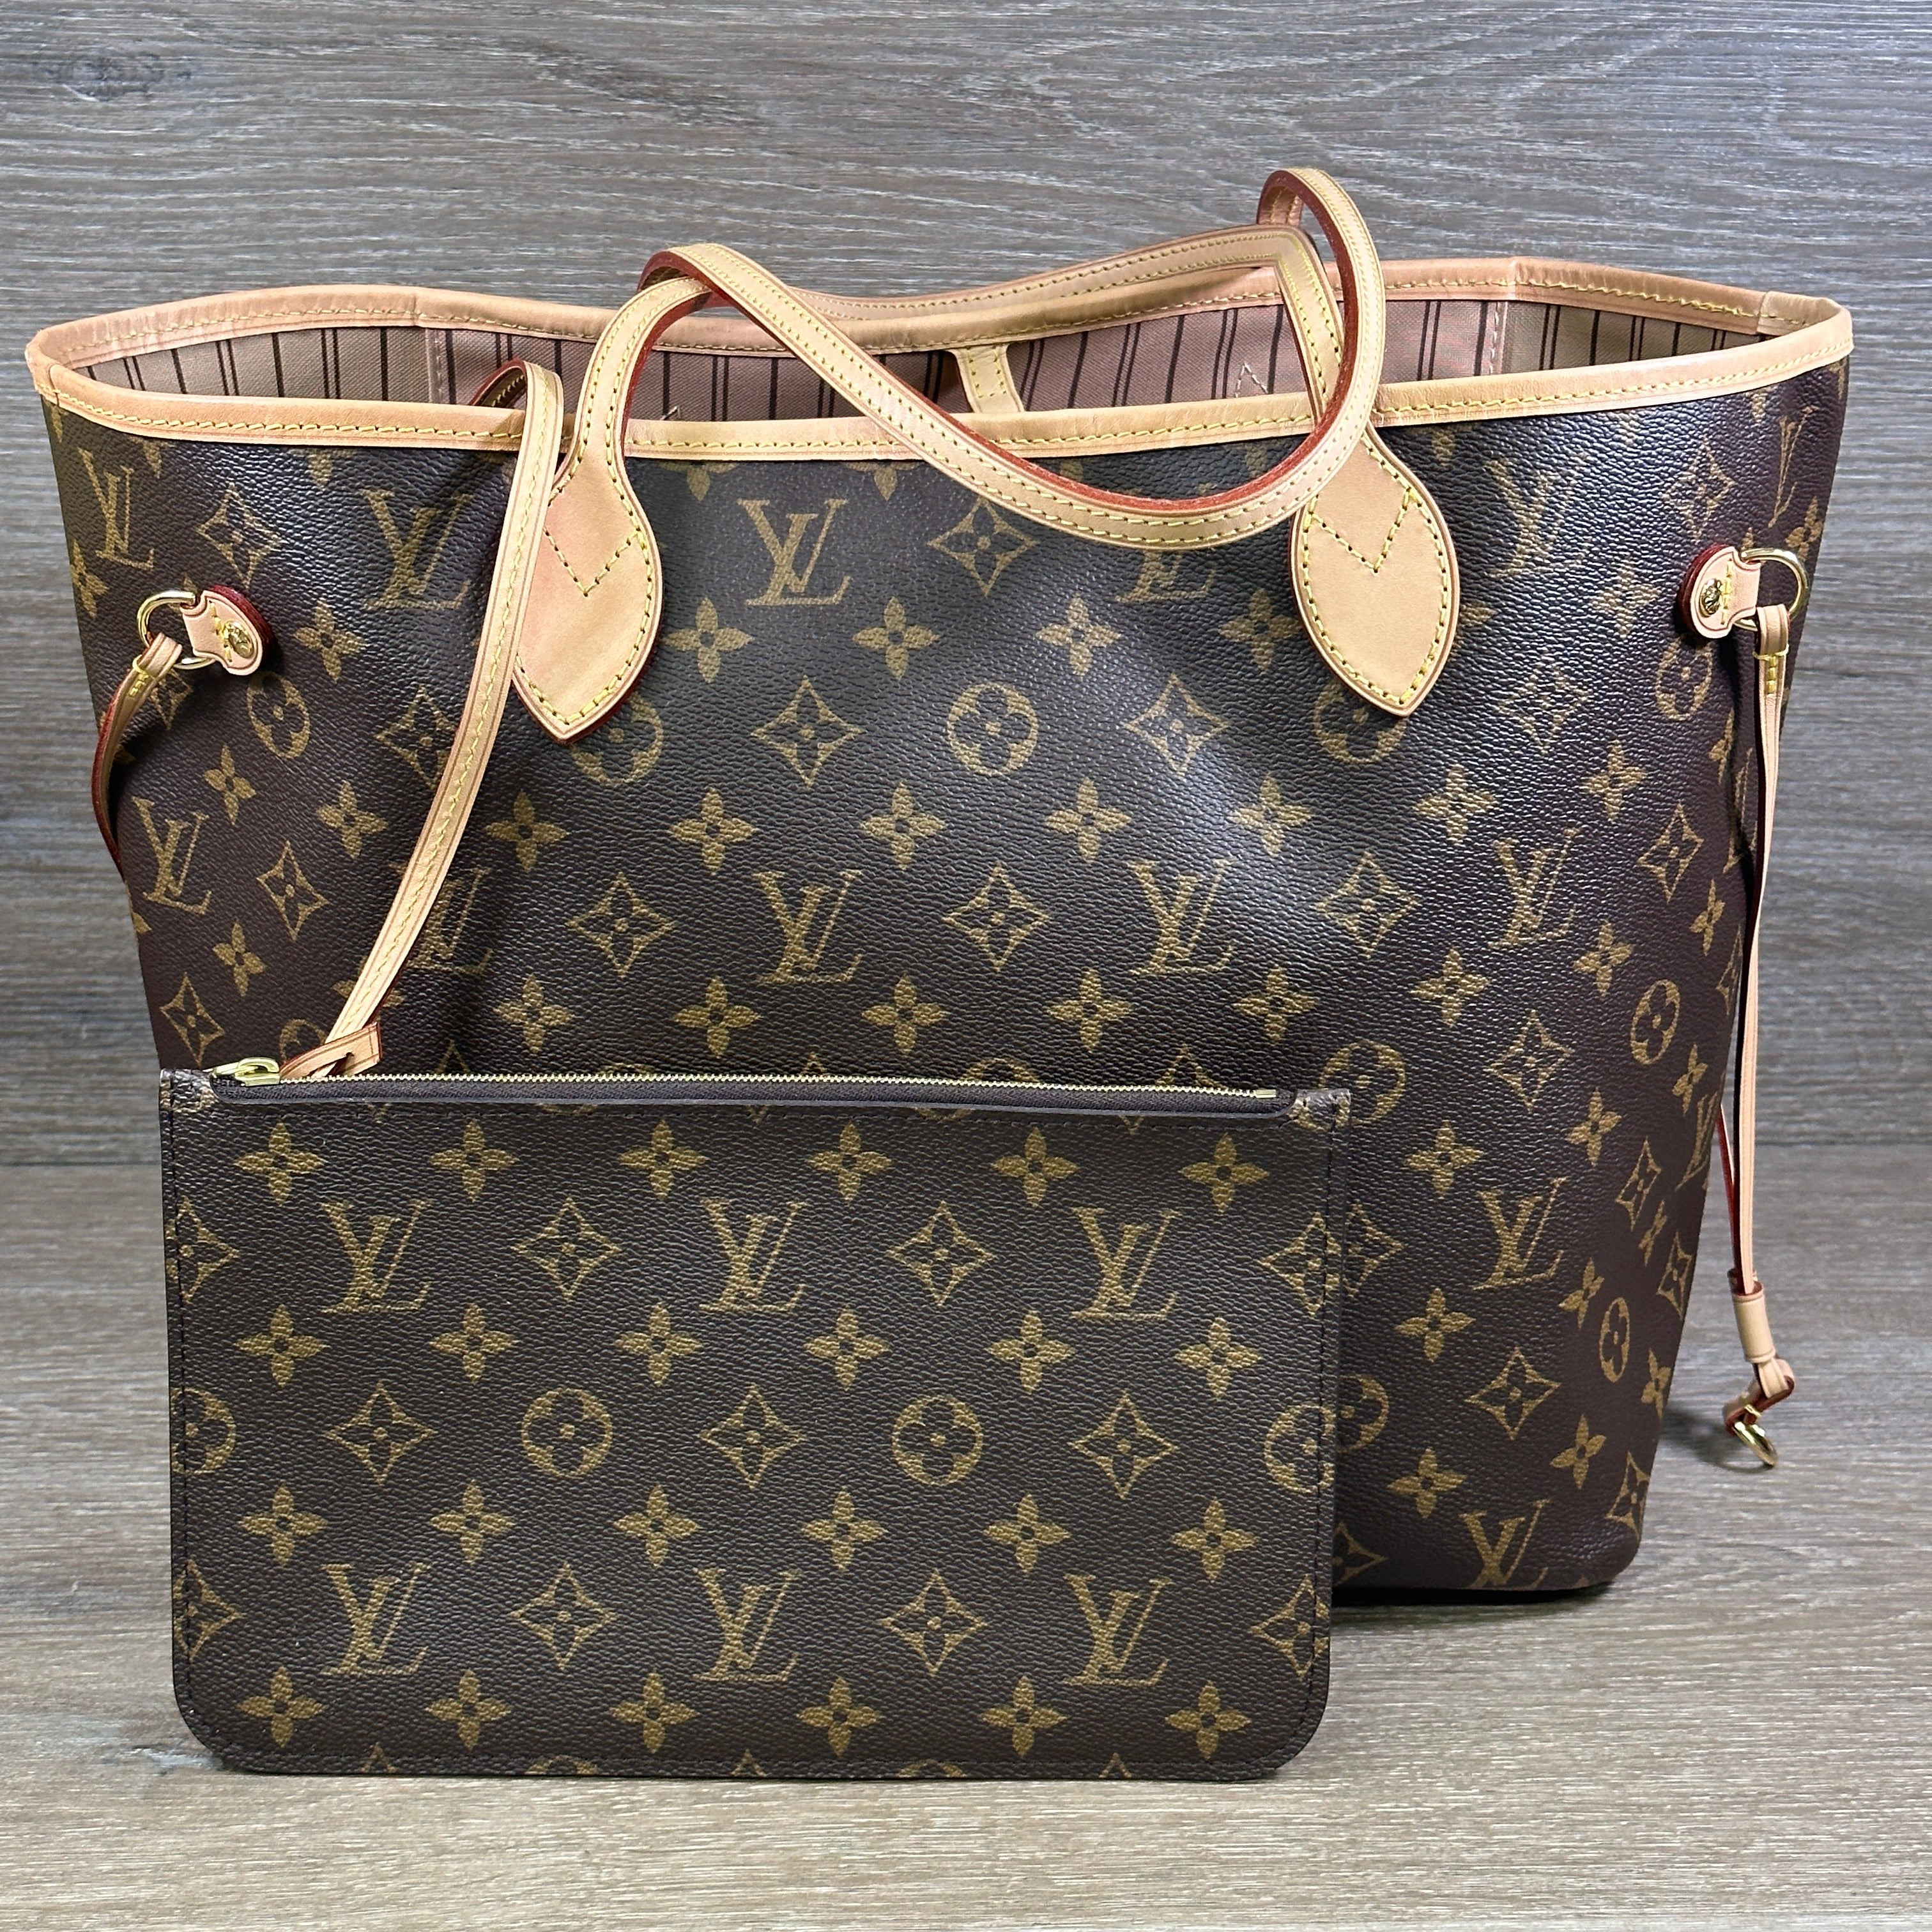 New and used Louis Vuitton Neverfull Handbags for sale, Facebook  Marketplace